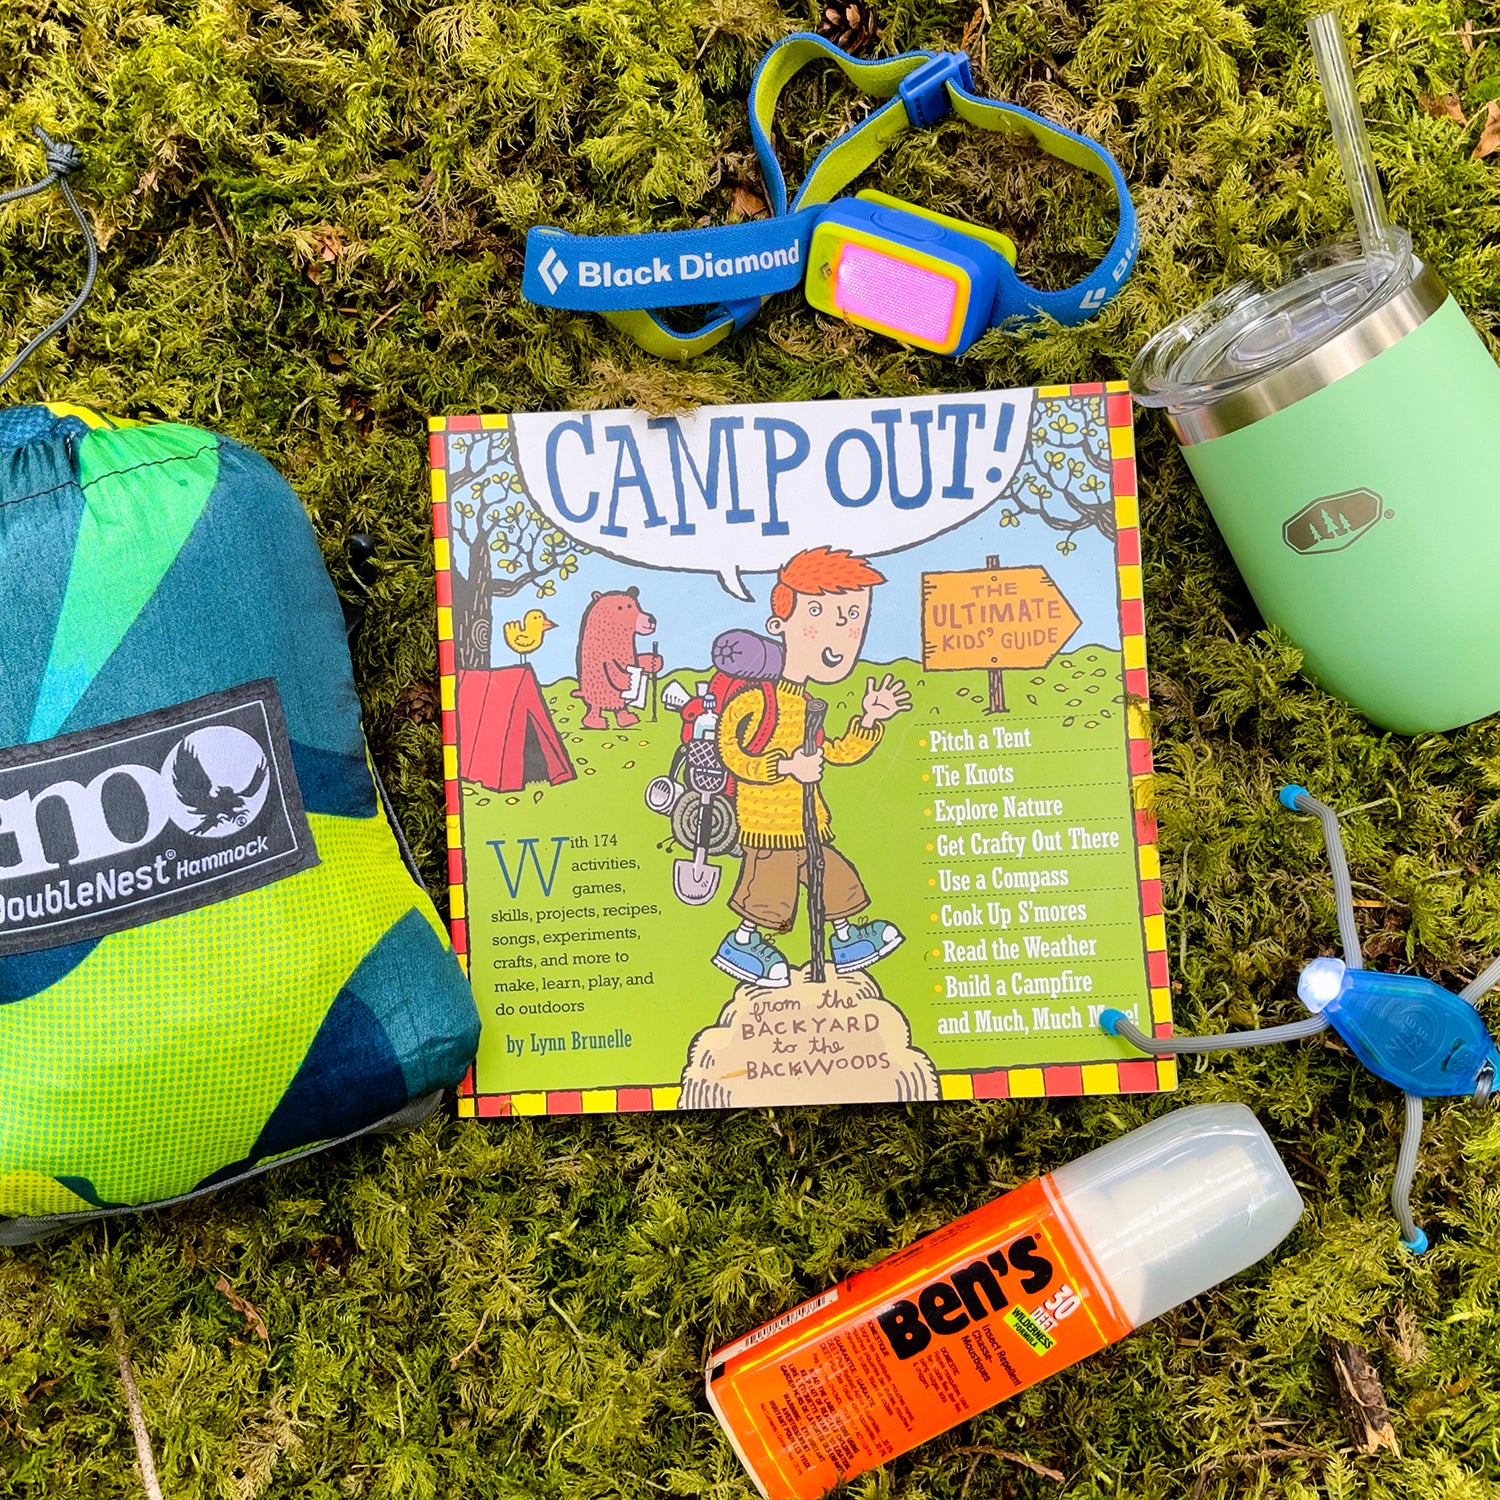 Outdoor Gear that Makes Camping with Kids More Fun